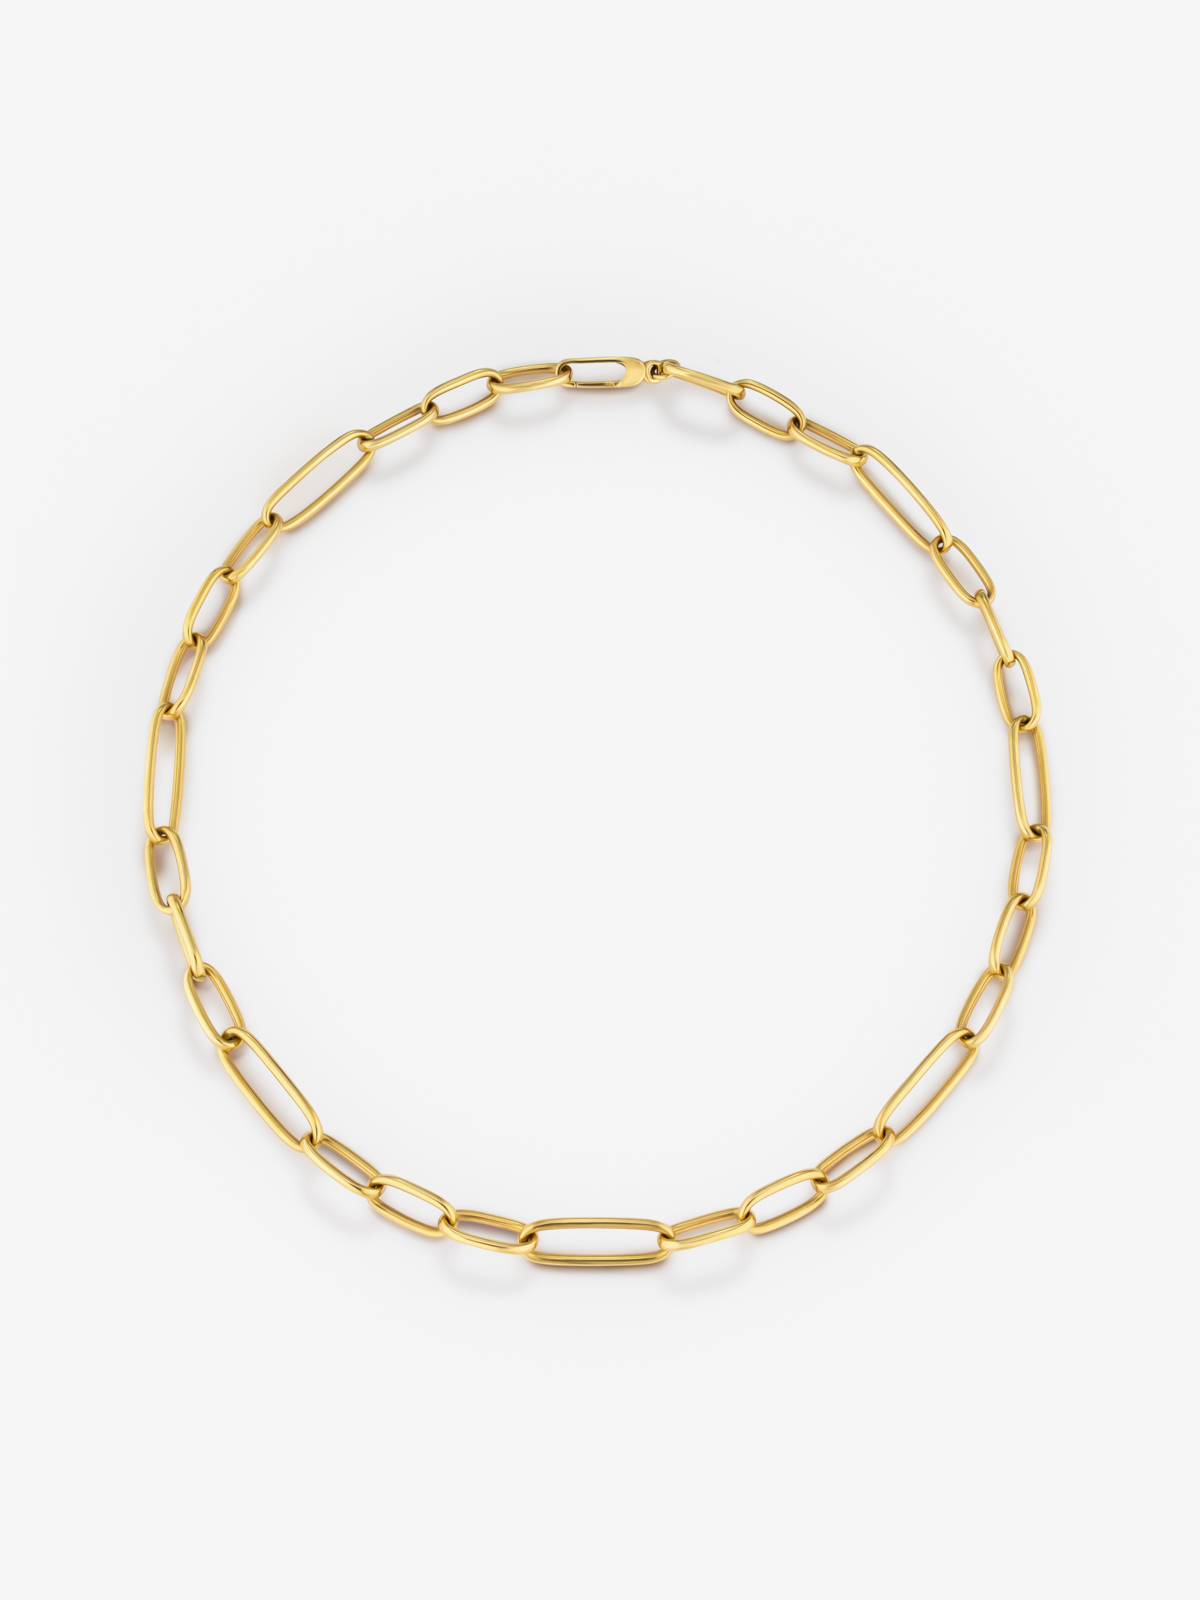 Medium link necklace of 18K yellow gold